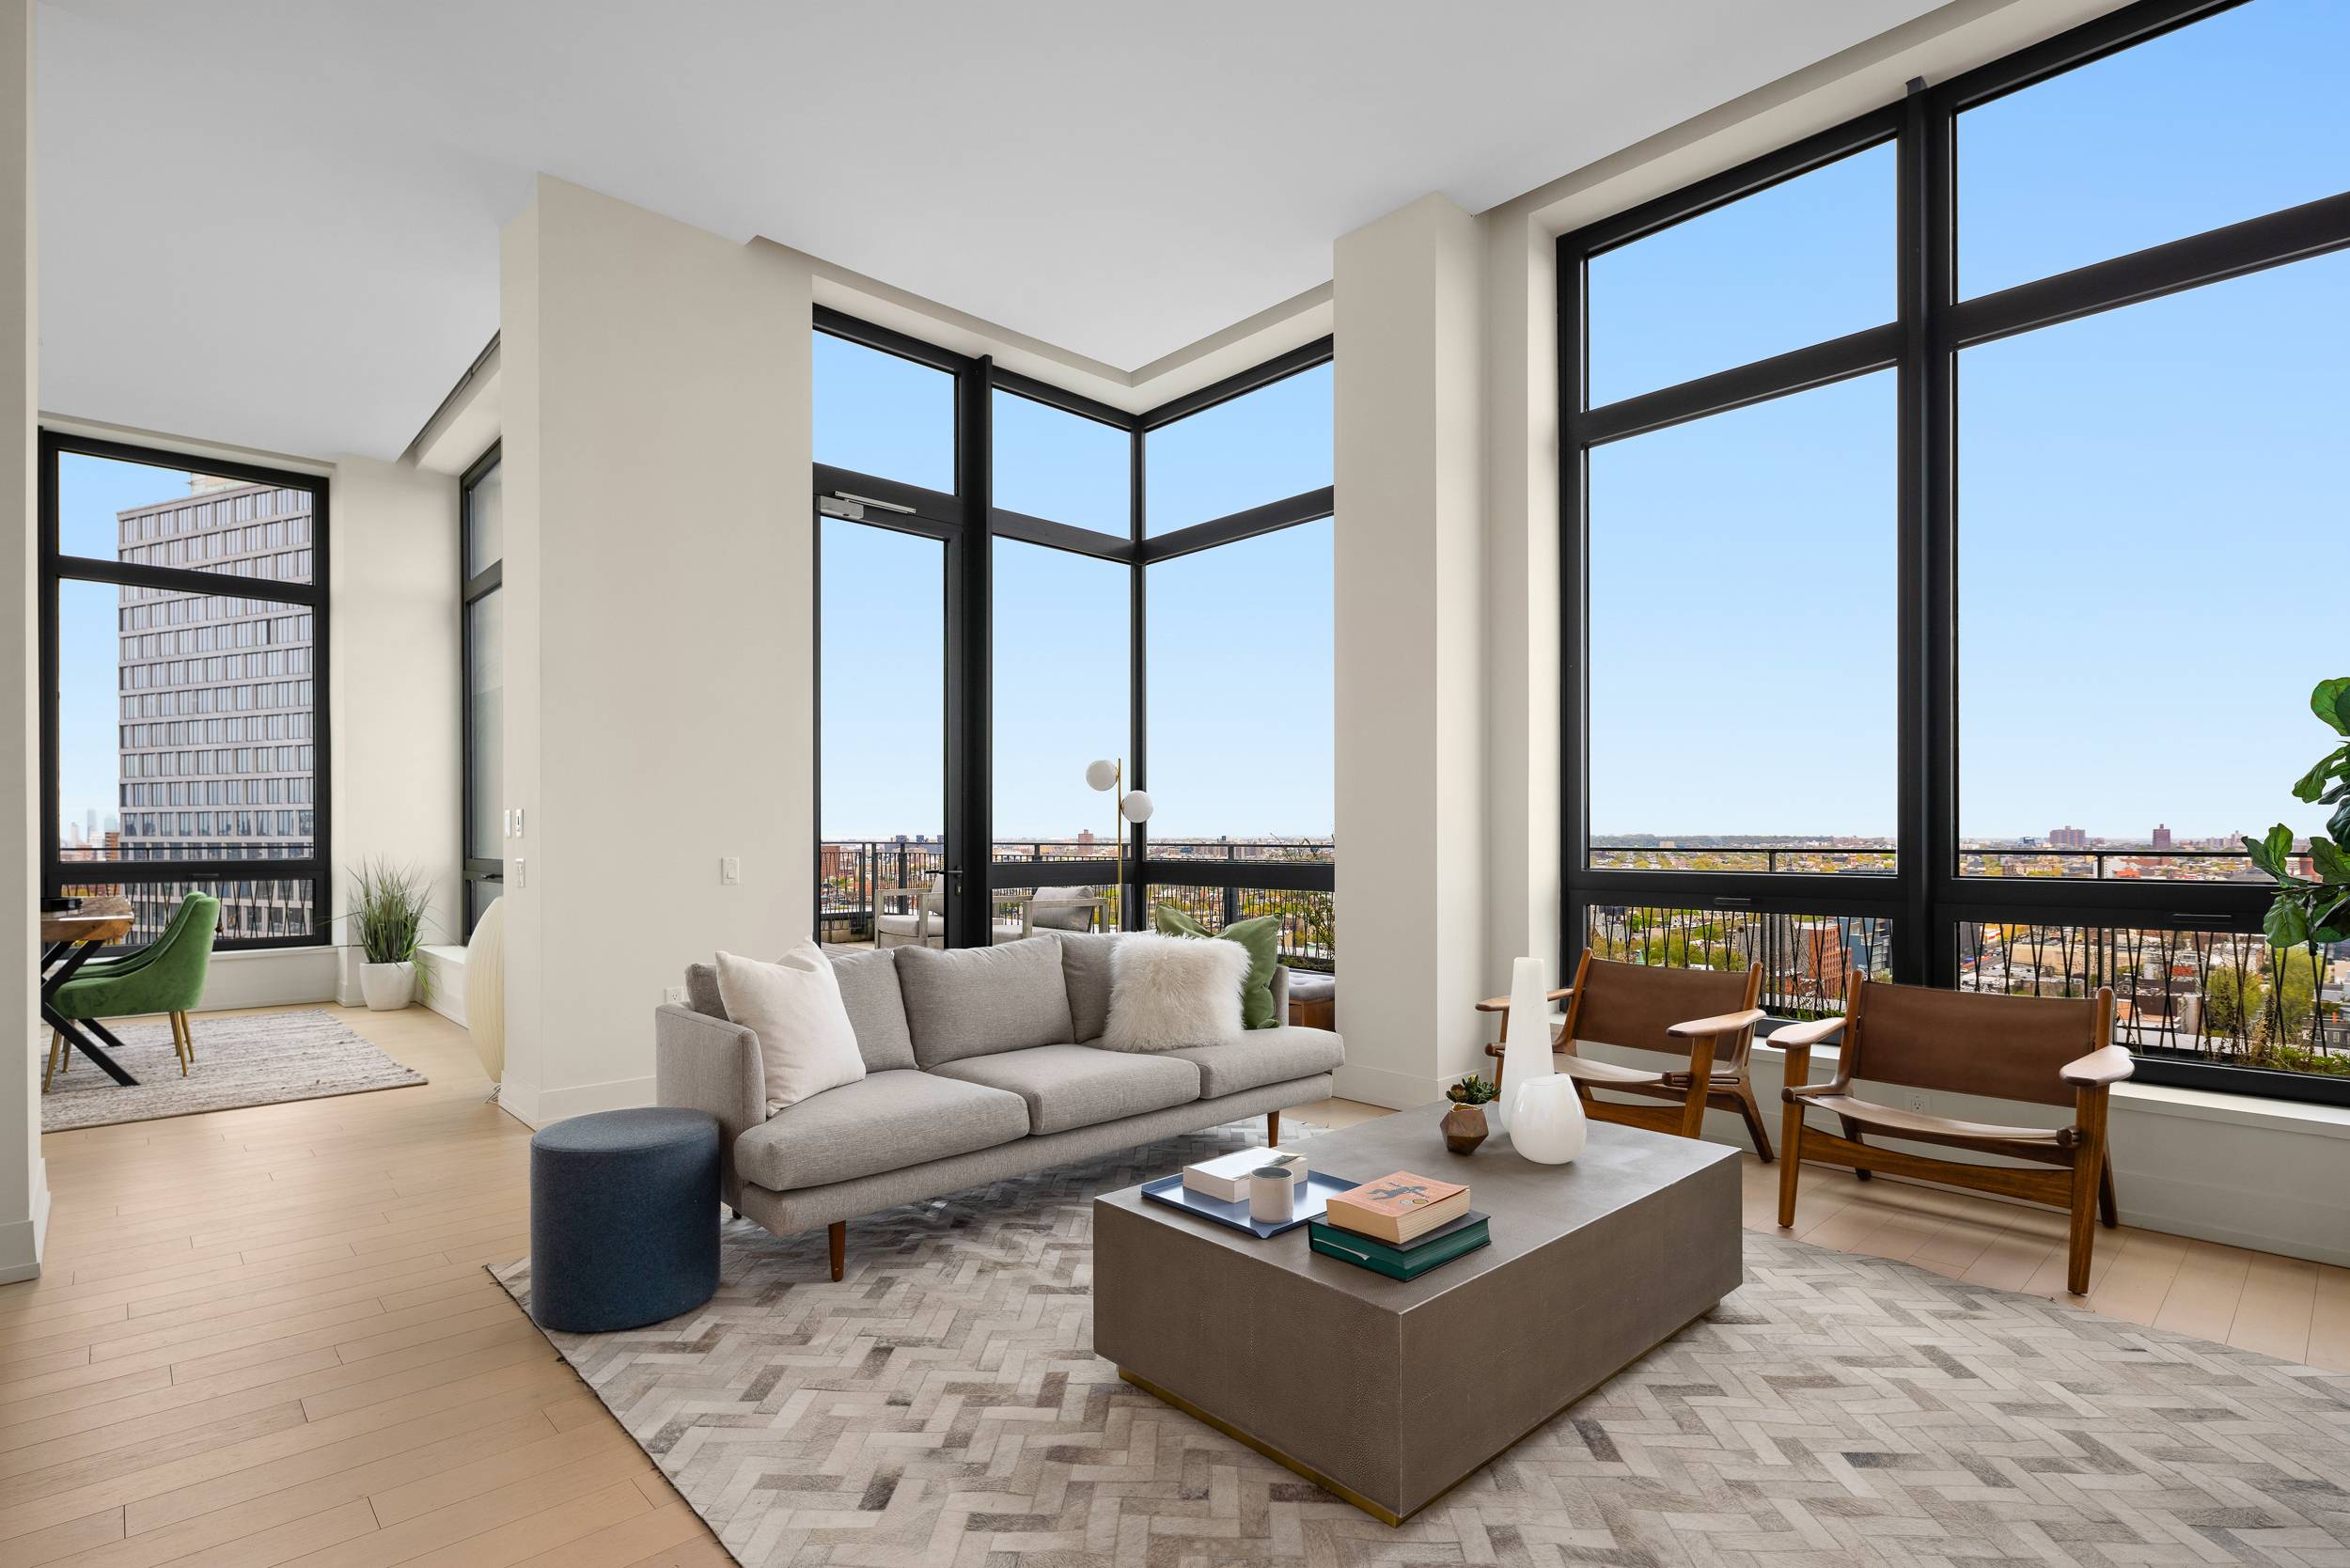 25 YEAR 421 A TAX ABATEMENT AND IMMEDIATE OCCUPANCY 550 Vanderbilt is the first residential building to open in Pacific Park Brooklyn, the revolutionary new Frank Gehry designed 22 acre ...